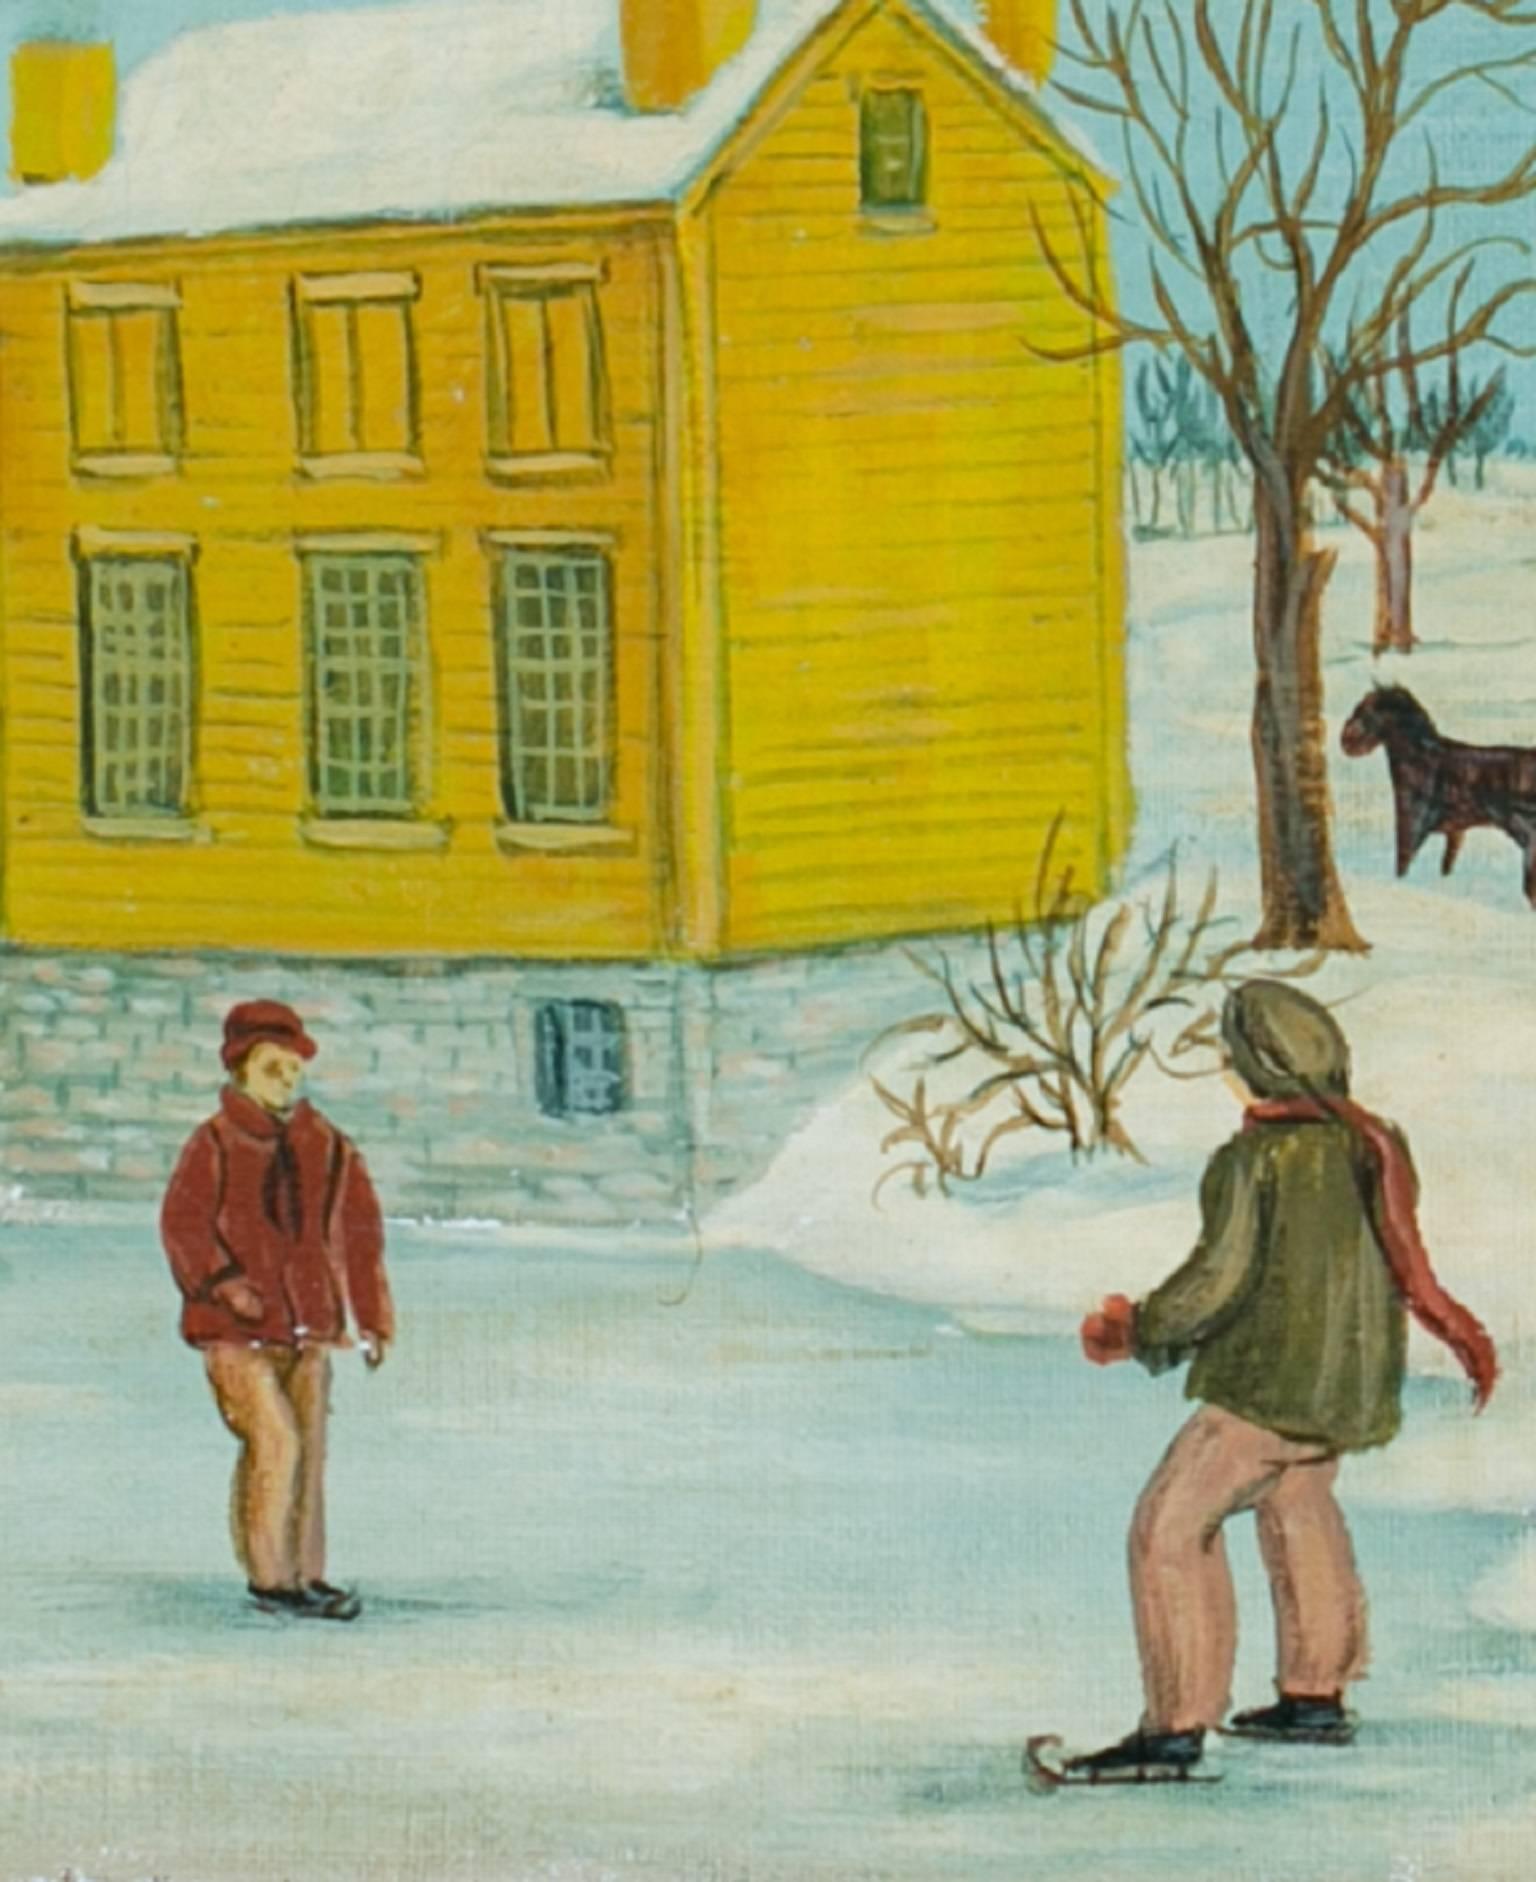 One of a kind work of art by American folk artist Lew Hudnall. Acrylic on stretched canvas, signed and dated 1972. Scene shows children ice skating and a figure in a horse-drawn sled.